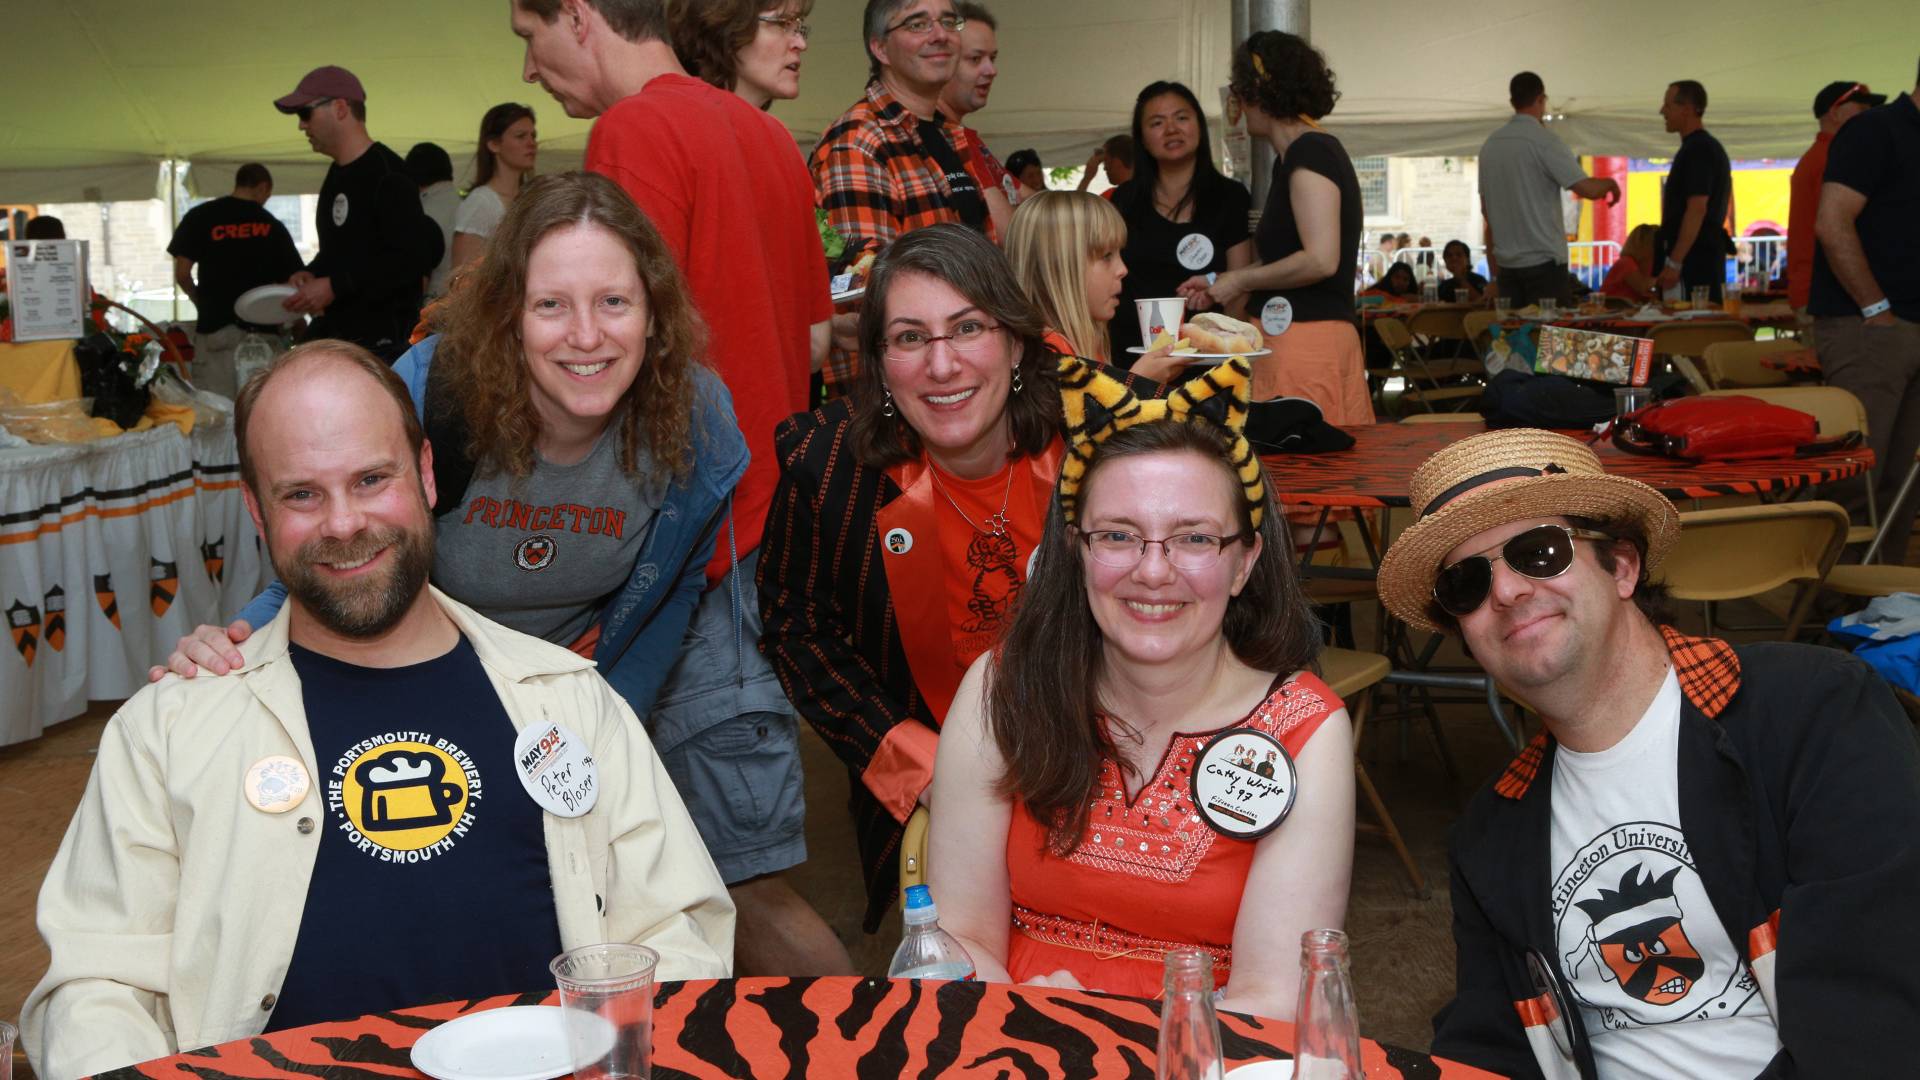 Photo of friends and families at reunions posing at table